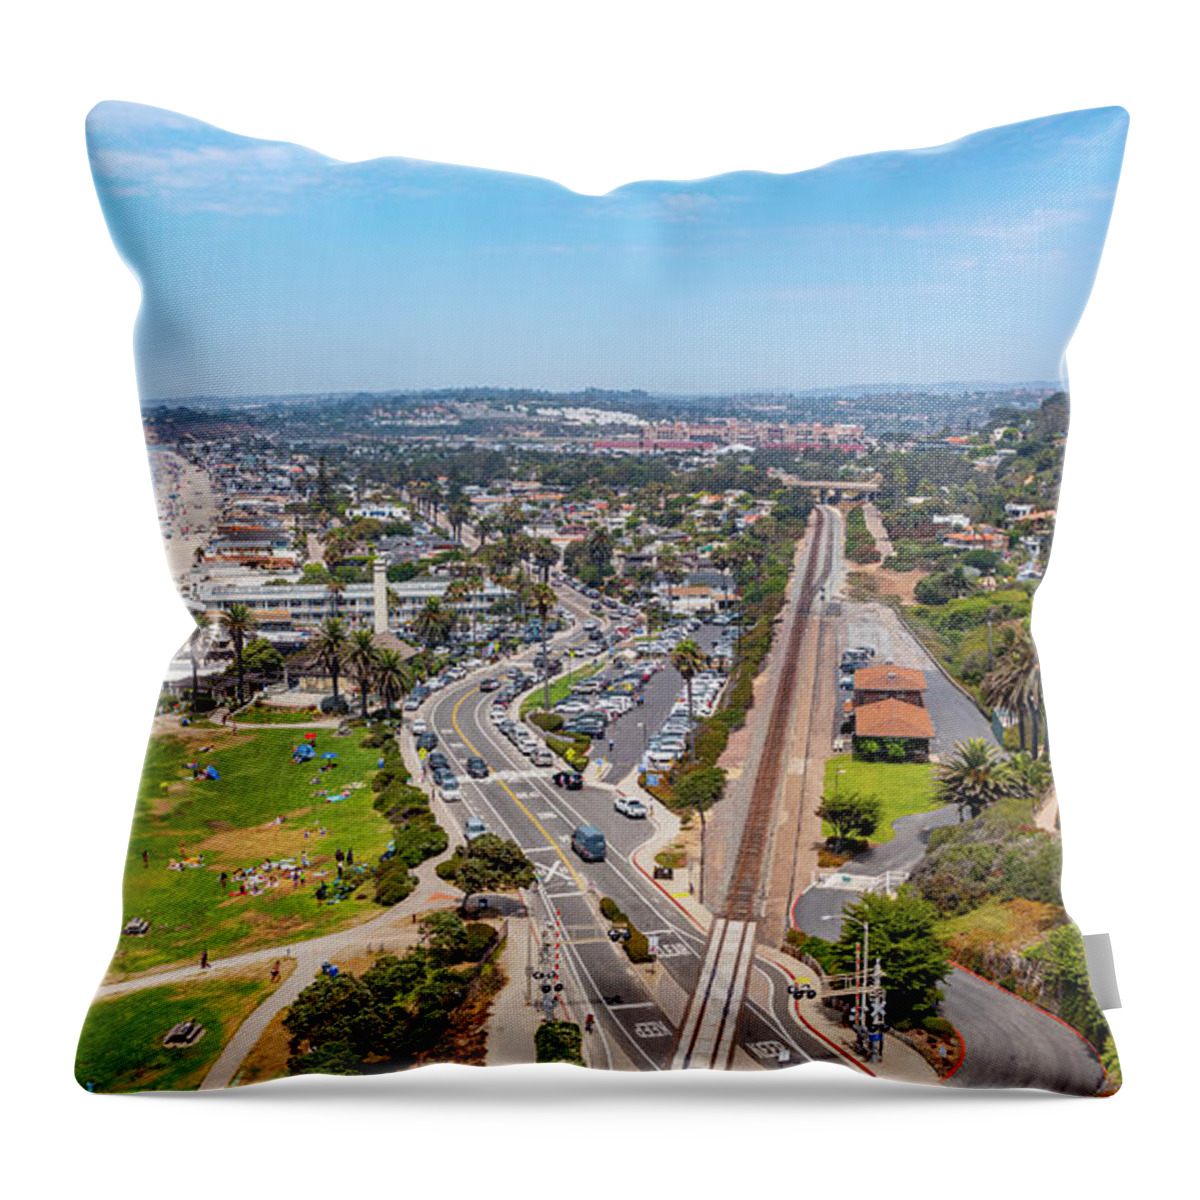 Del Mar Throw Pillow featuring the photograph Del Mar California Drone Photo by Anthony Giammarino